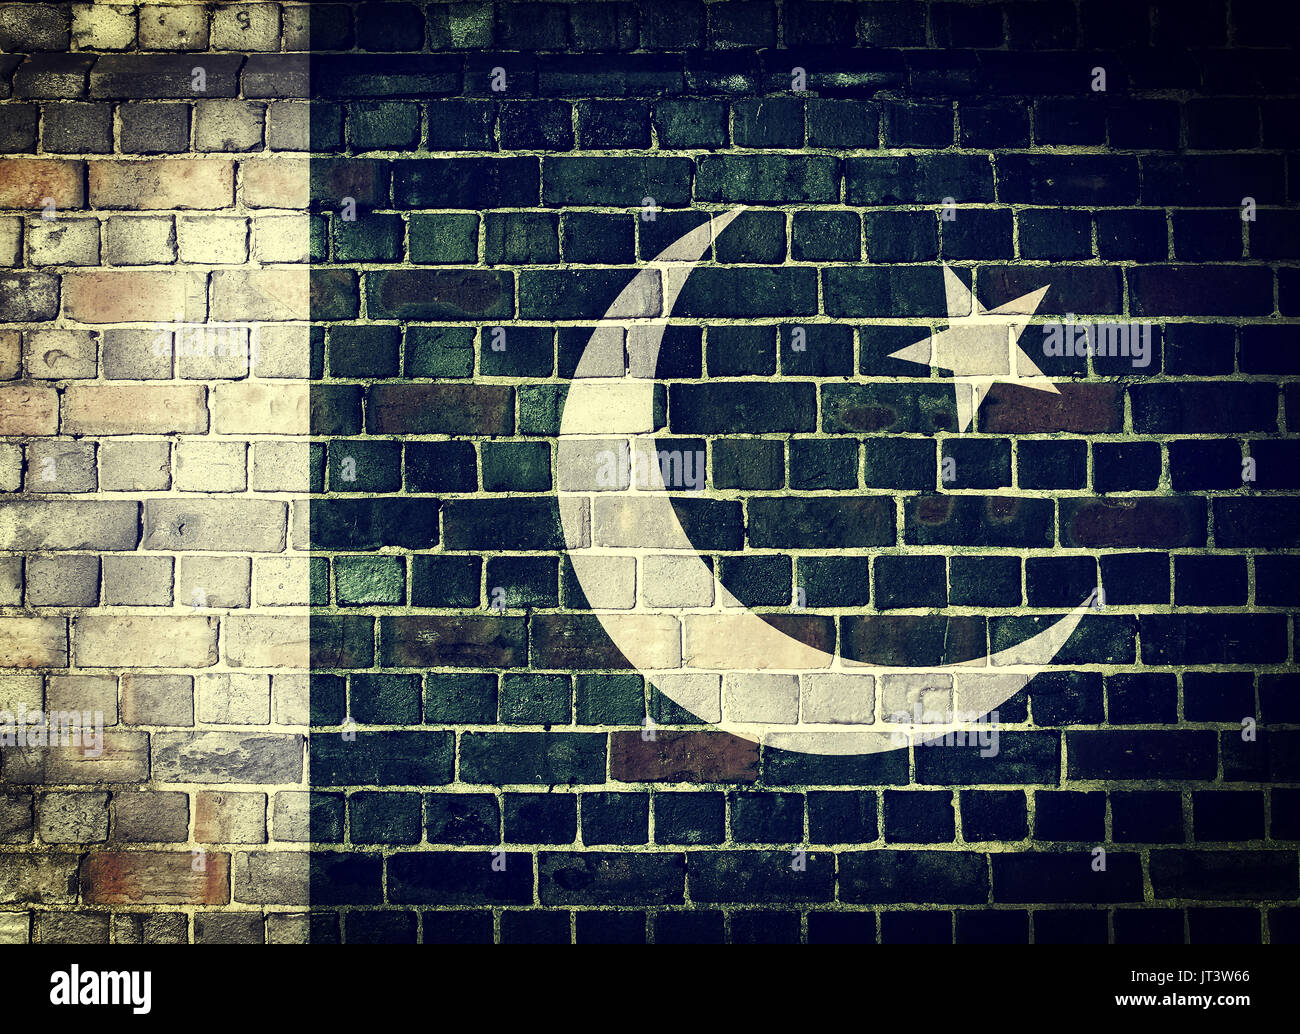 Faded Pakistani flag on an old brick wall background with a dark vignette Stock Photo